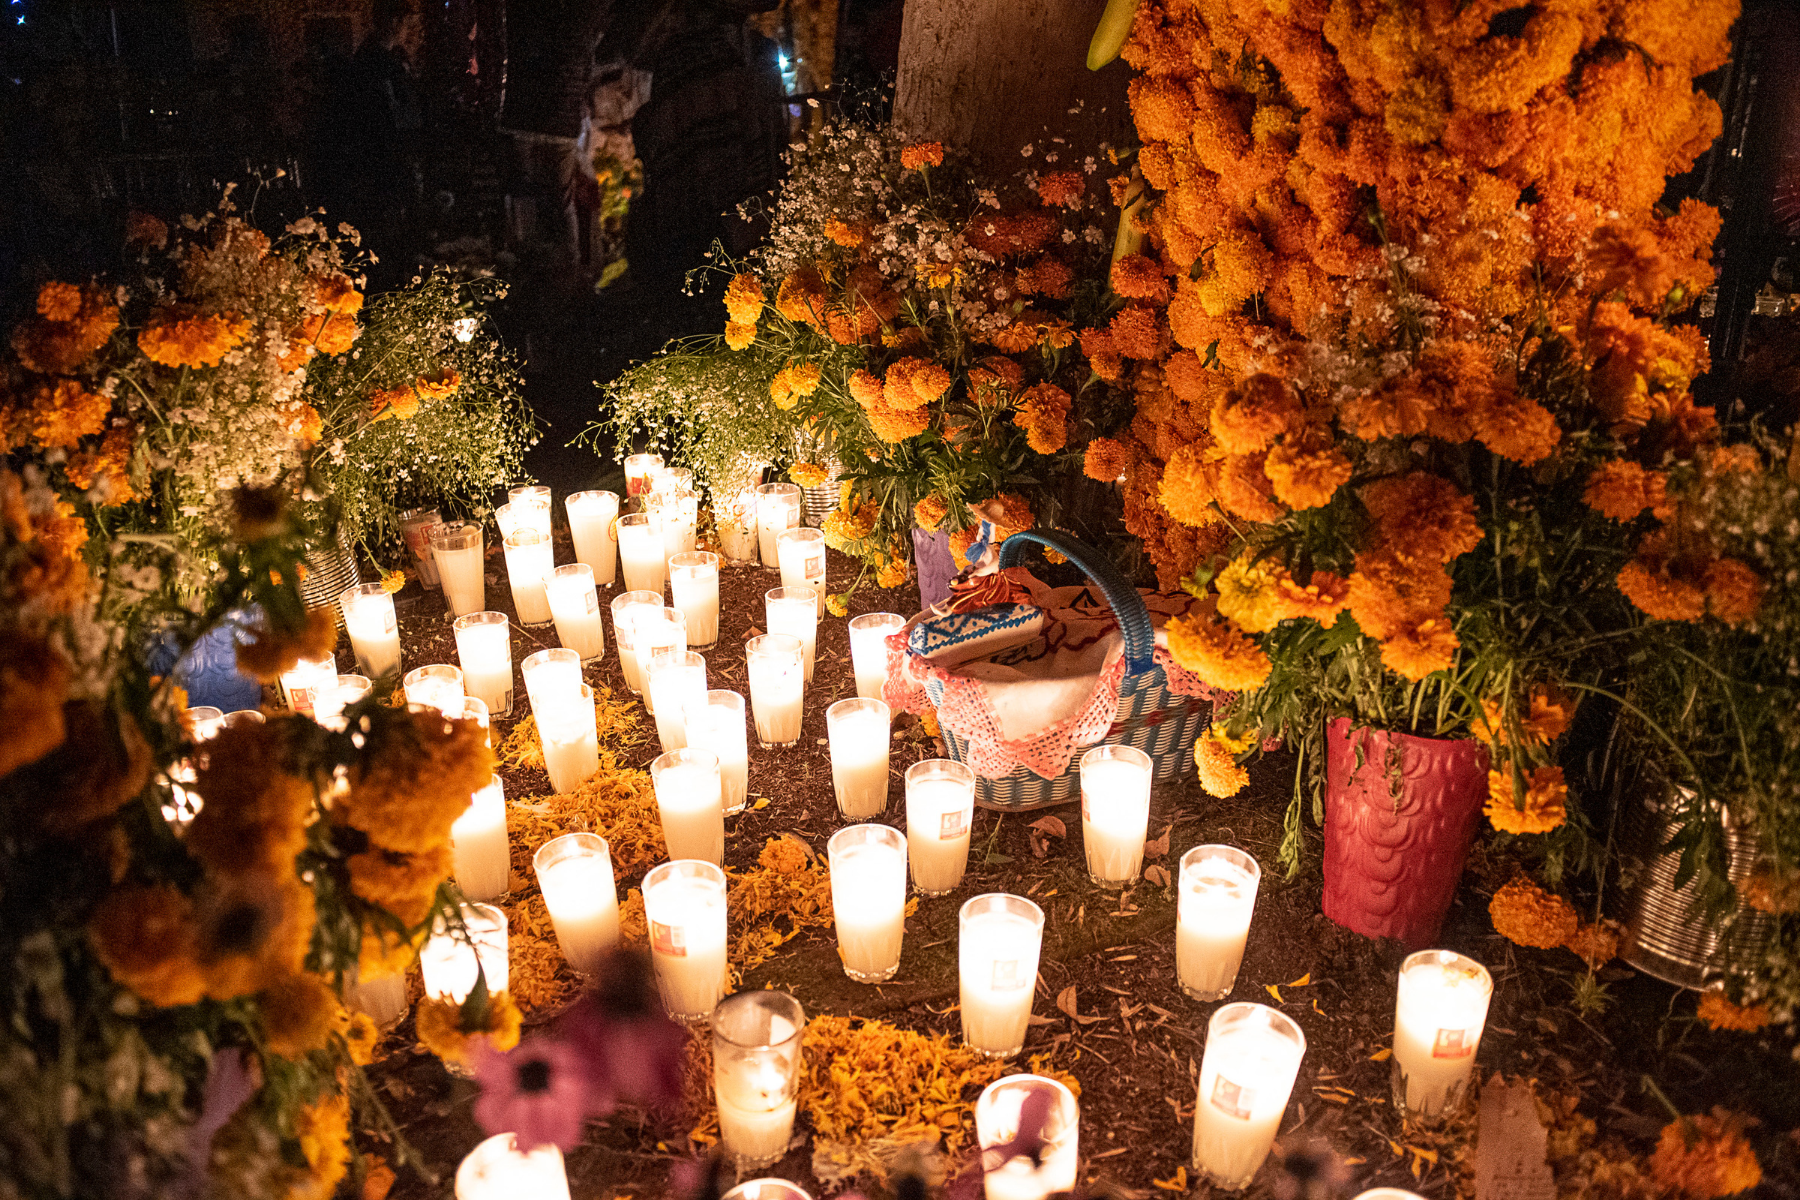 An altar, or ofrenda, for Dia de los Muertos with candles, sugar skulls, and orange flowers.